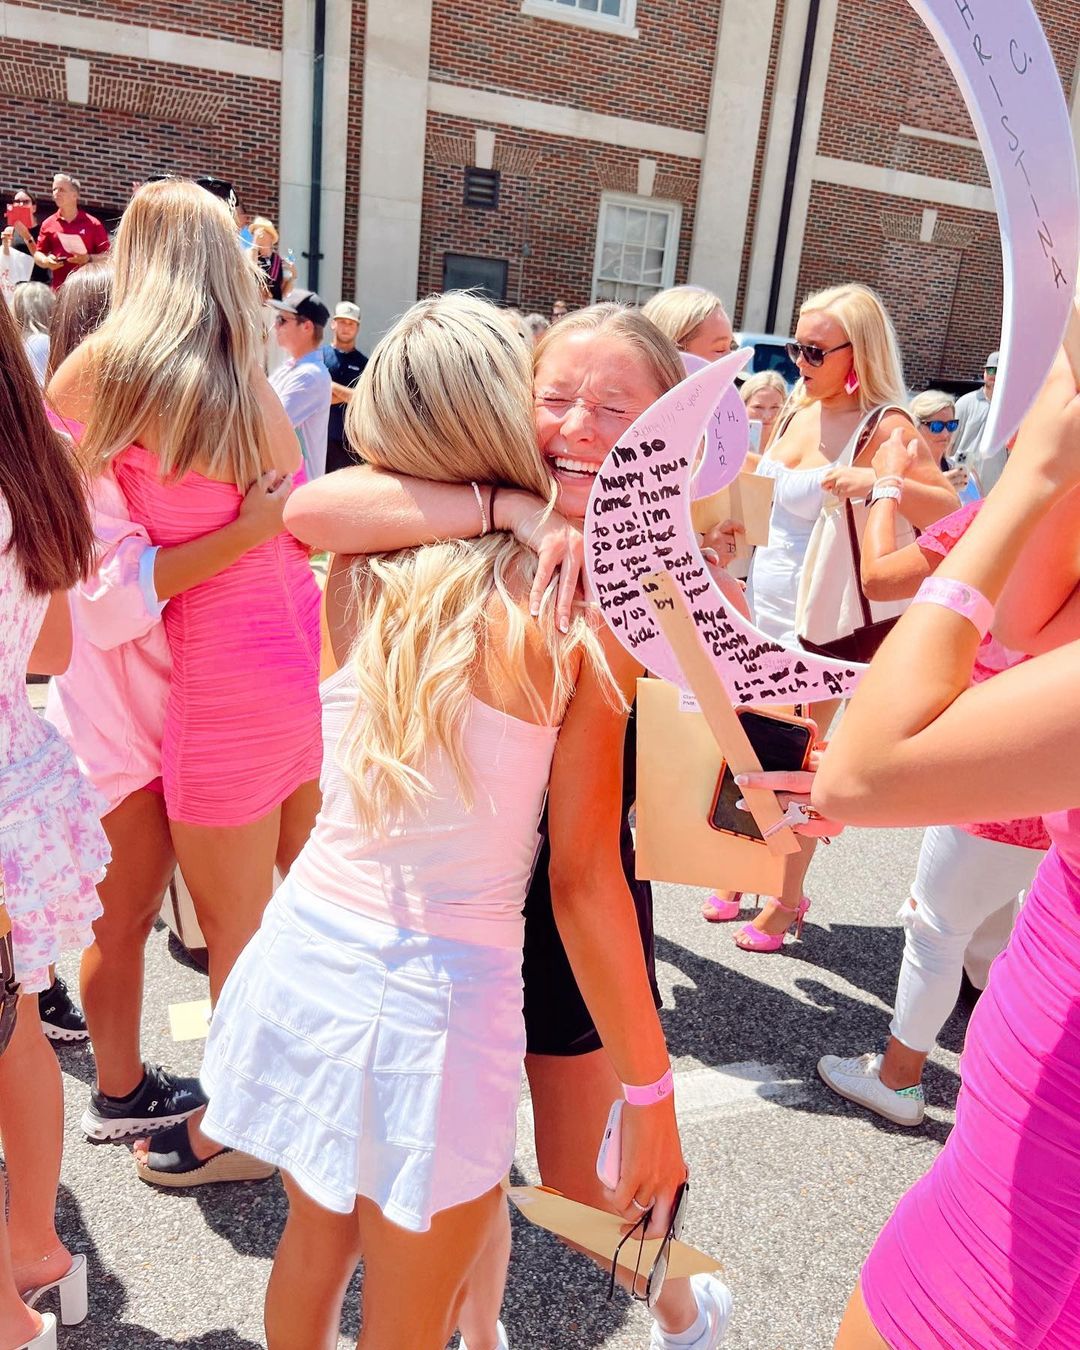 A blonde woman hugs another blonde woman in a crowd of women, many of whom are wearing pink.